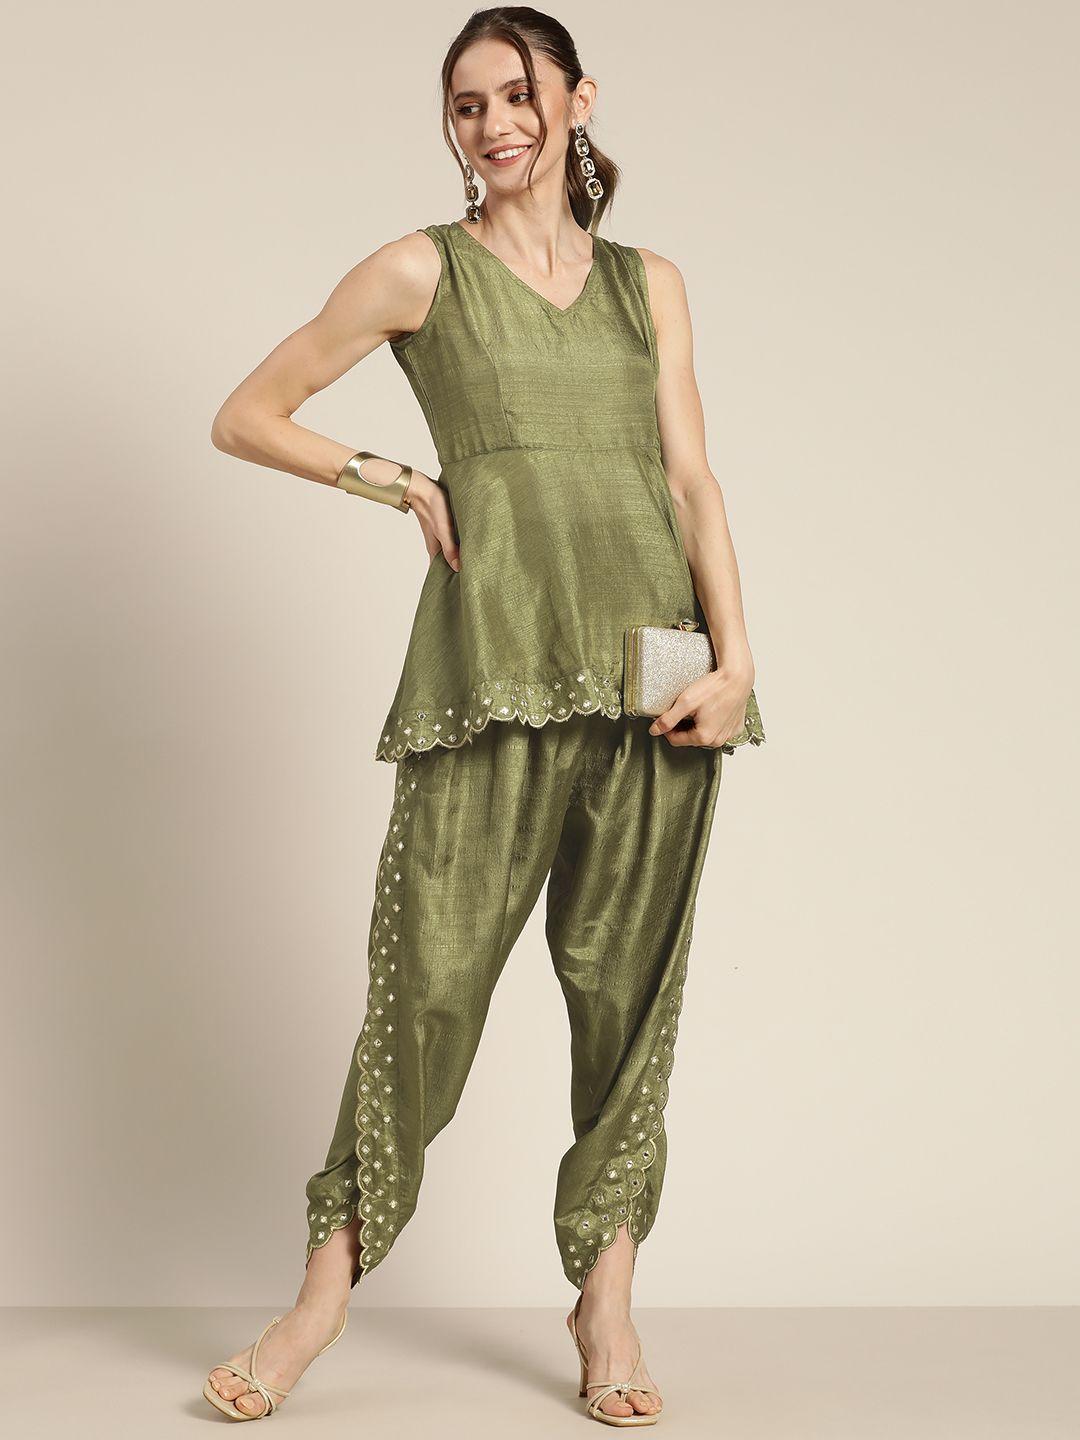 shae by sassafras women olive green embroidered mirror work dhoti pants